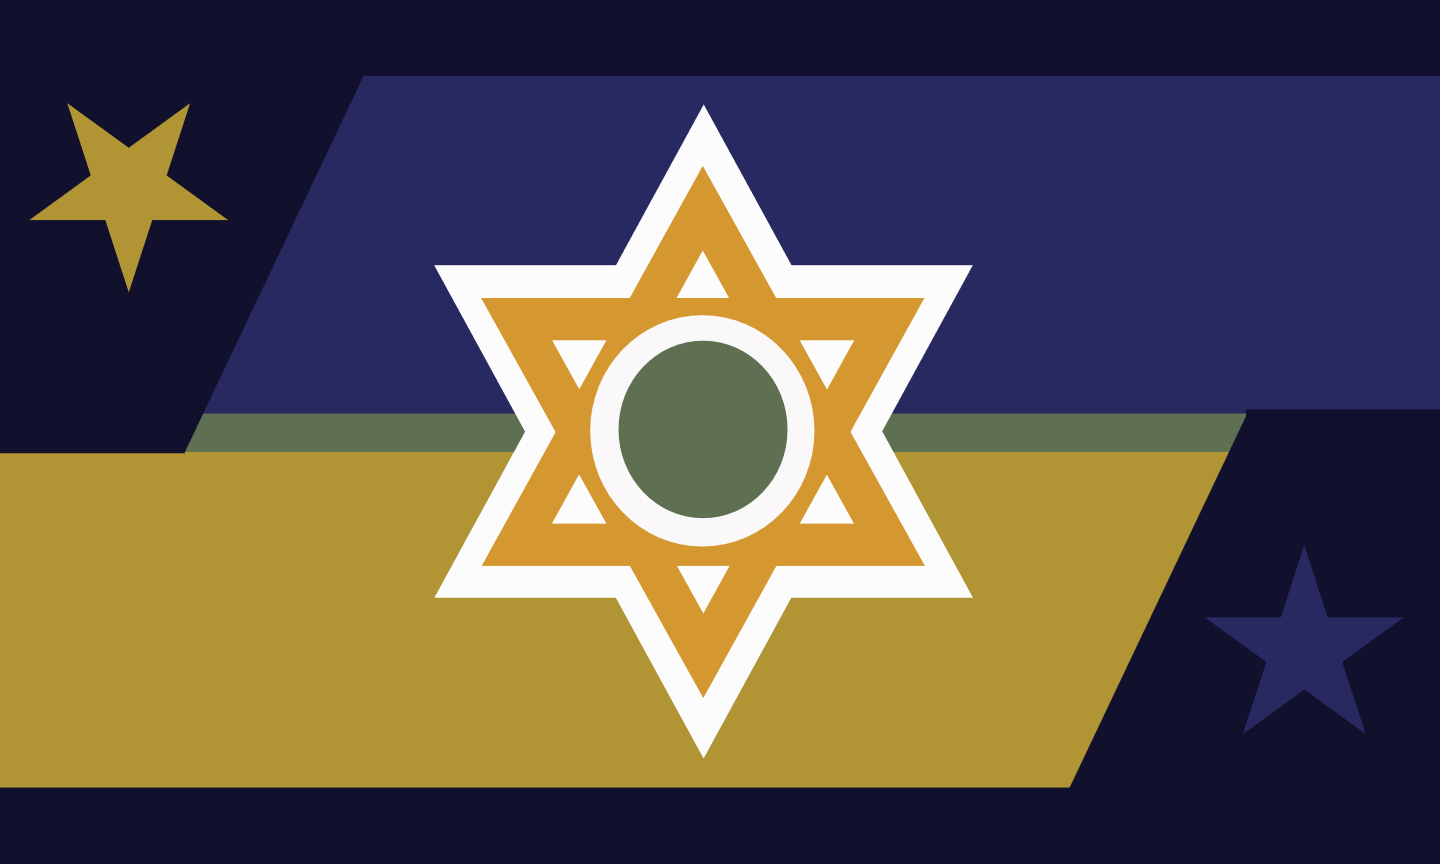 A golden star of david with white borders and a muted green circle sits in the center of this flag. The outer borders of the flag are a deep, midnight blue. In the top left corner is a yellow star in front of the midnight blue rhombus. In the bottom r